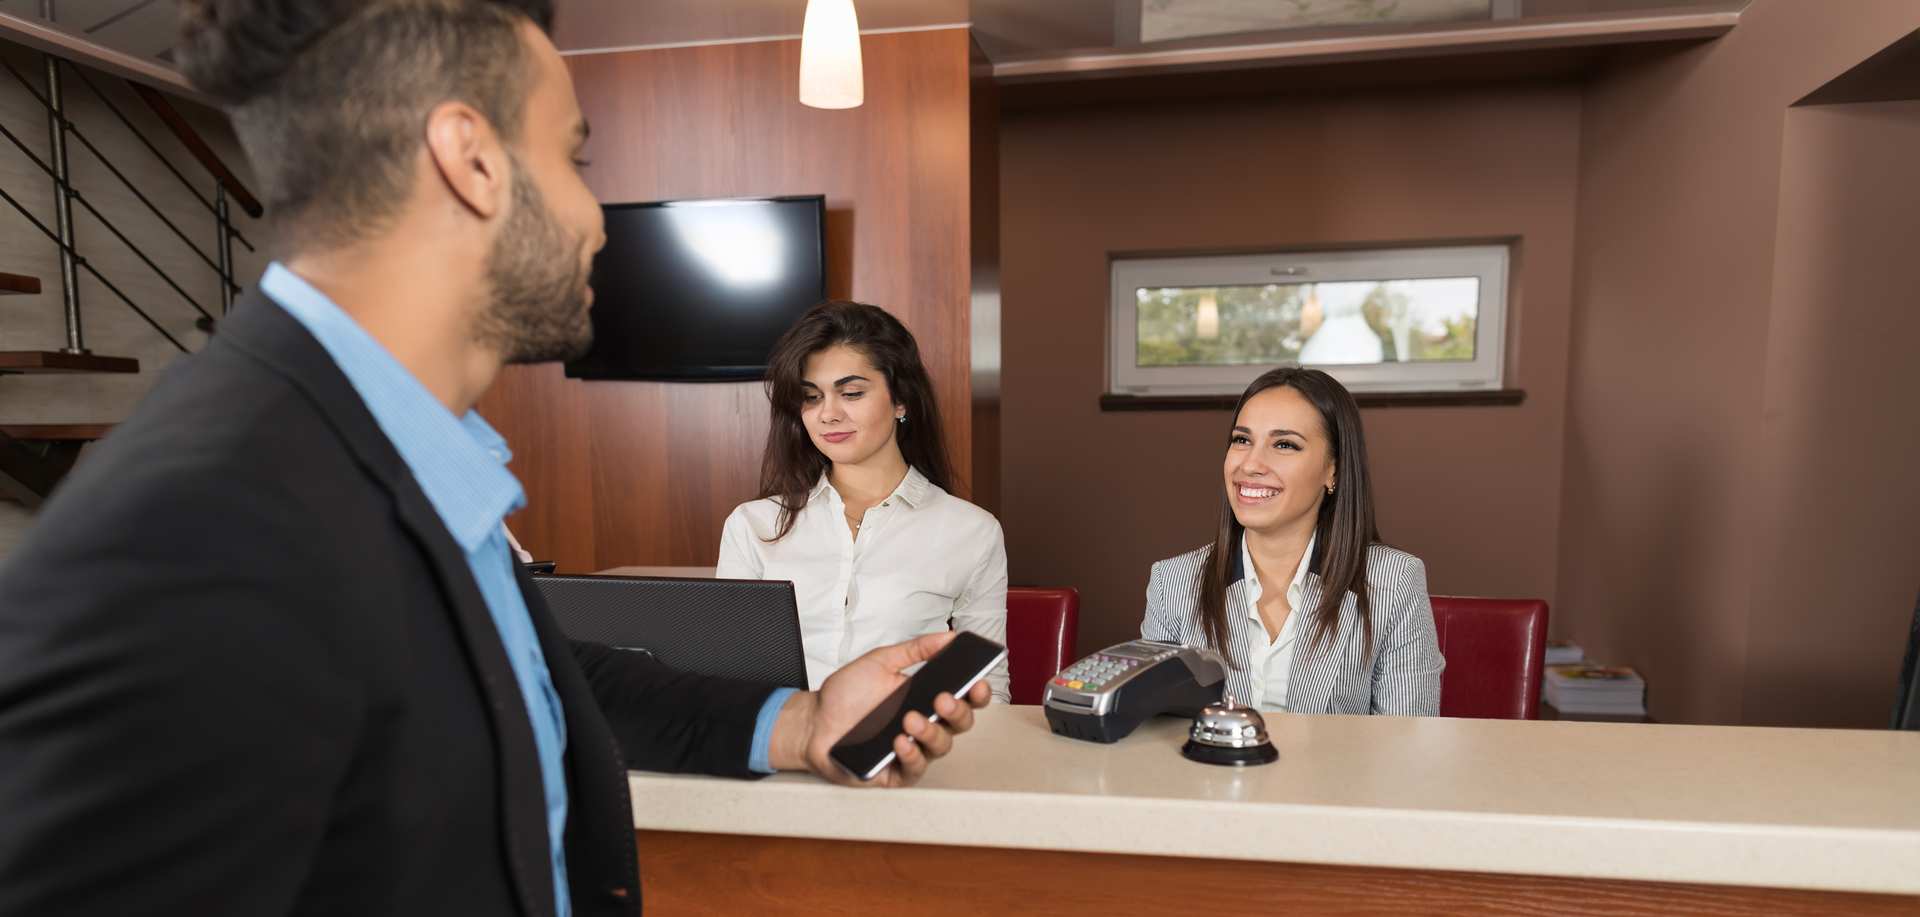 How to Write an Informative Welcome Text Message for Hotel Guests